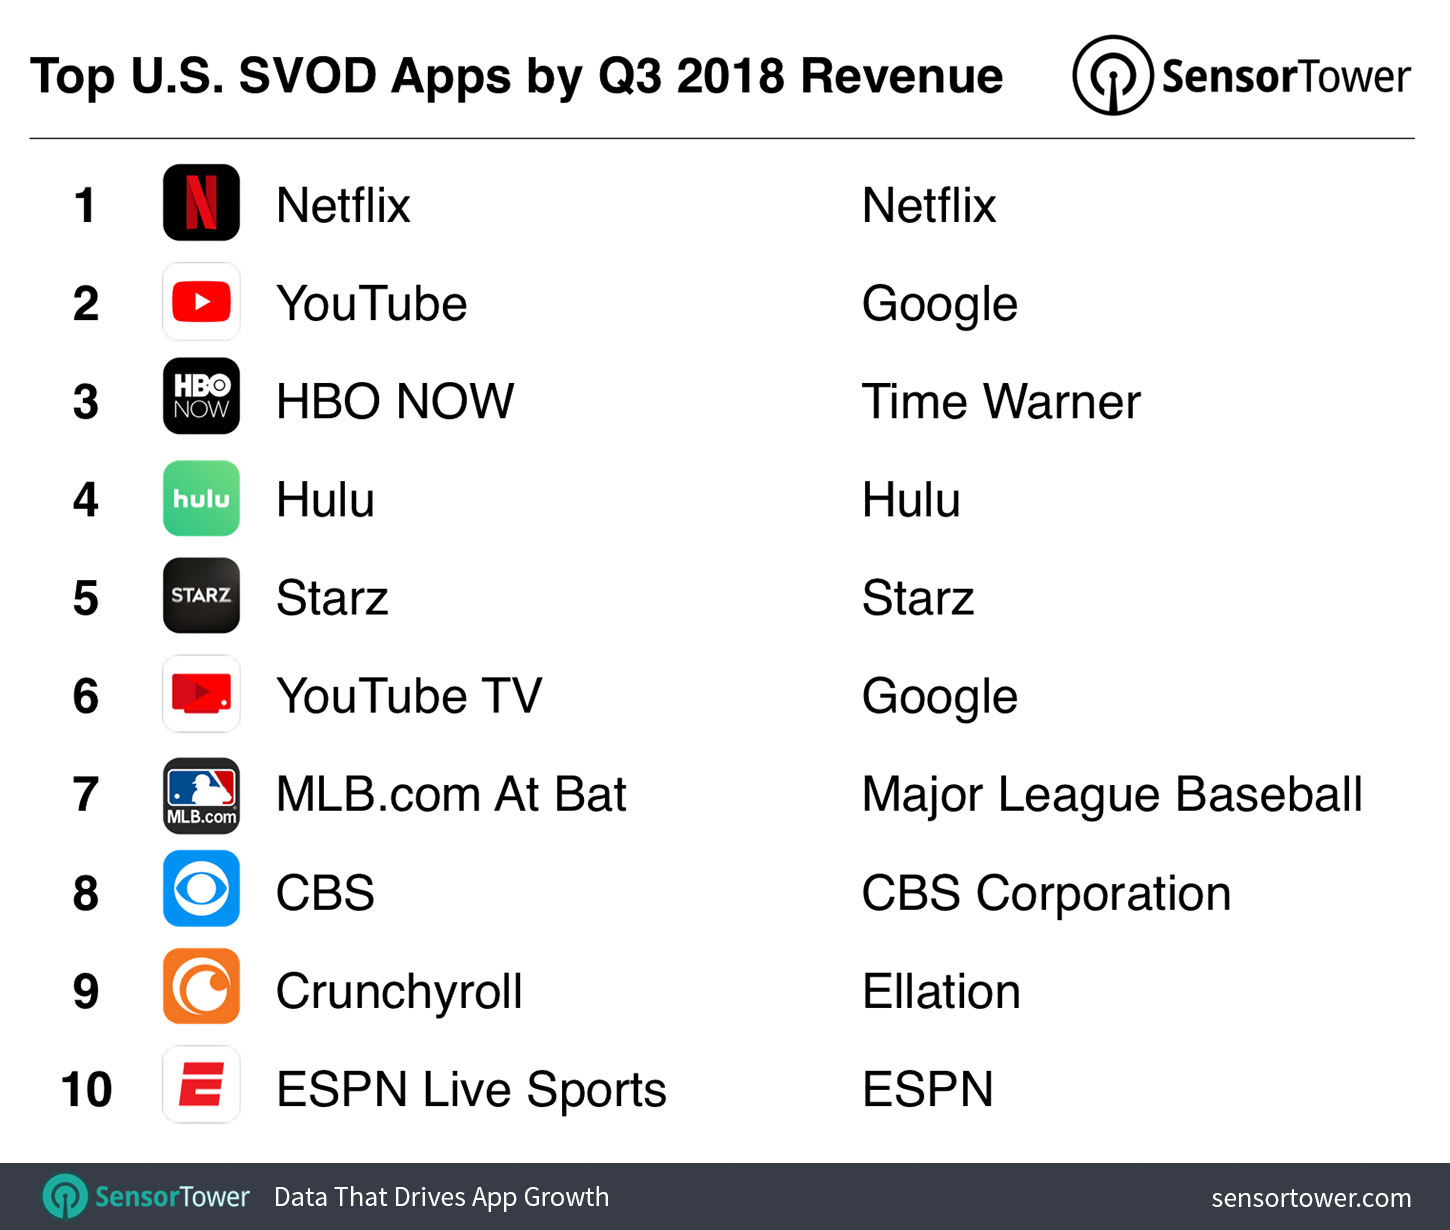 Top 10 U.S. SVOD Apps by Revenue for Q3 2018